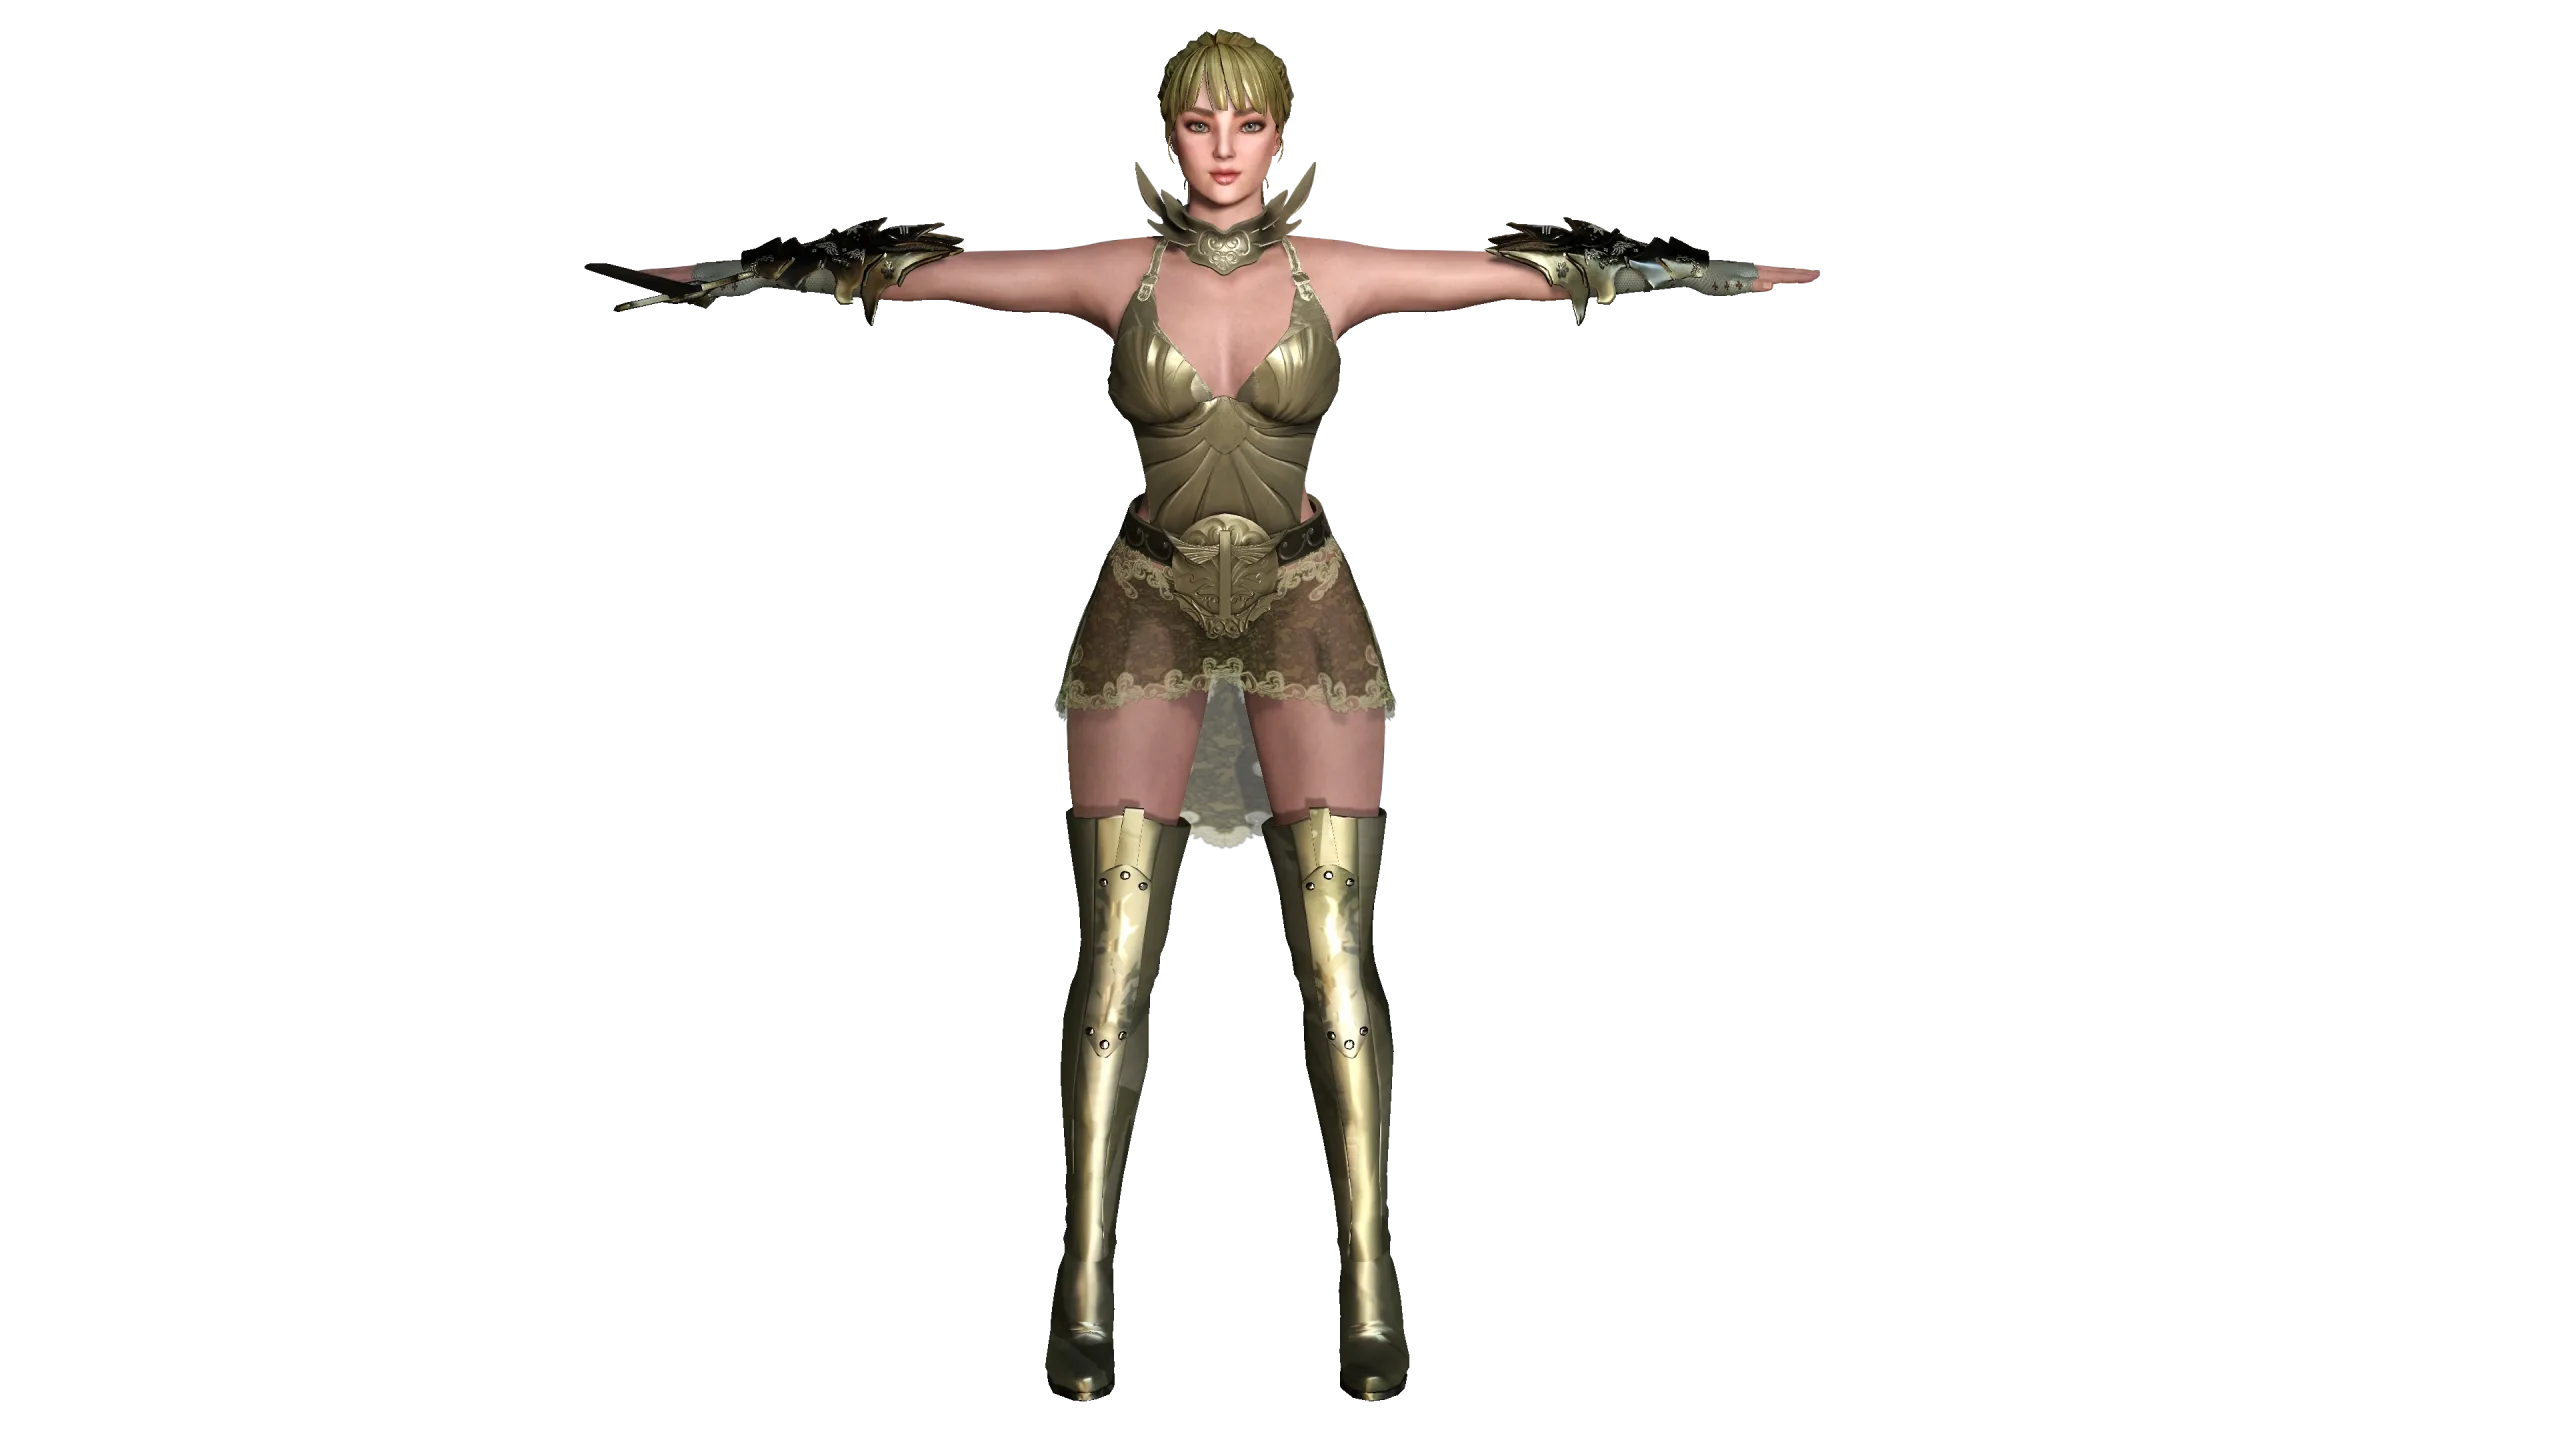 AAA 3D FANTASY FEMALE WARRIOR-REALISTIC RIG GAME CHARACTER